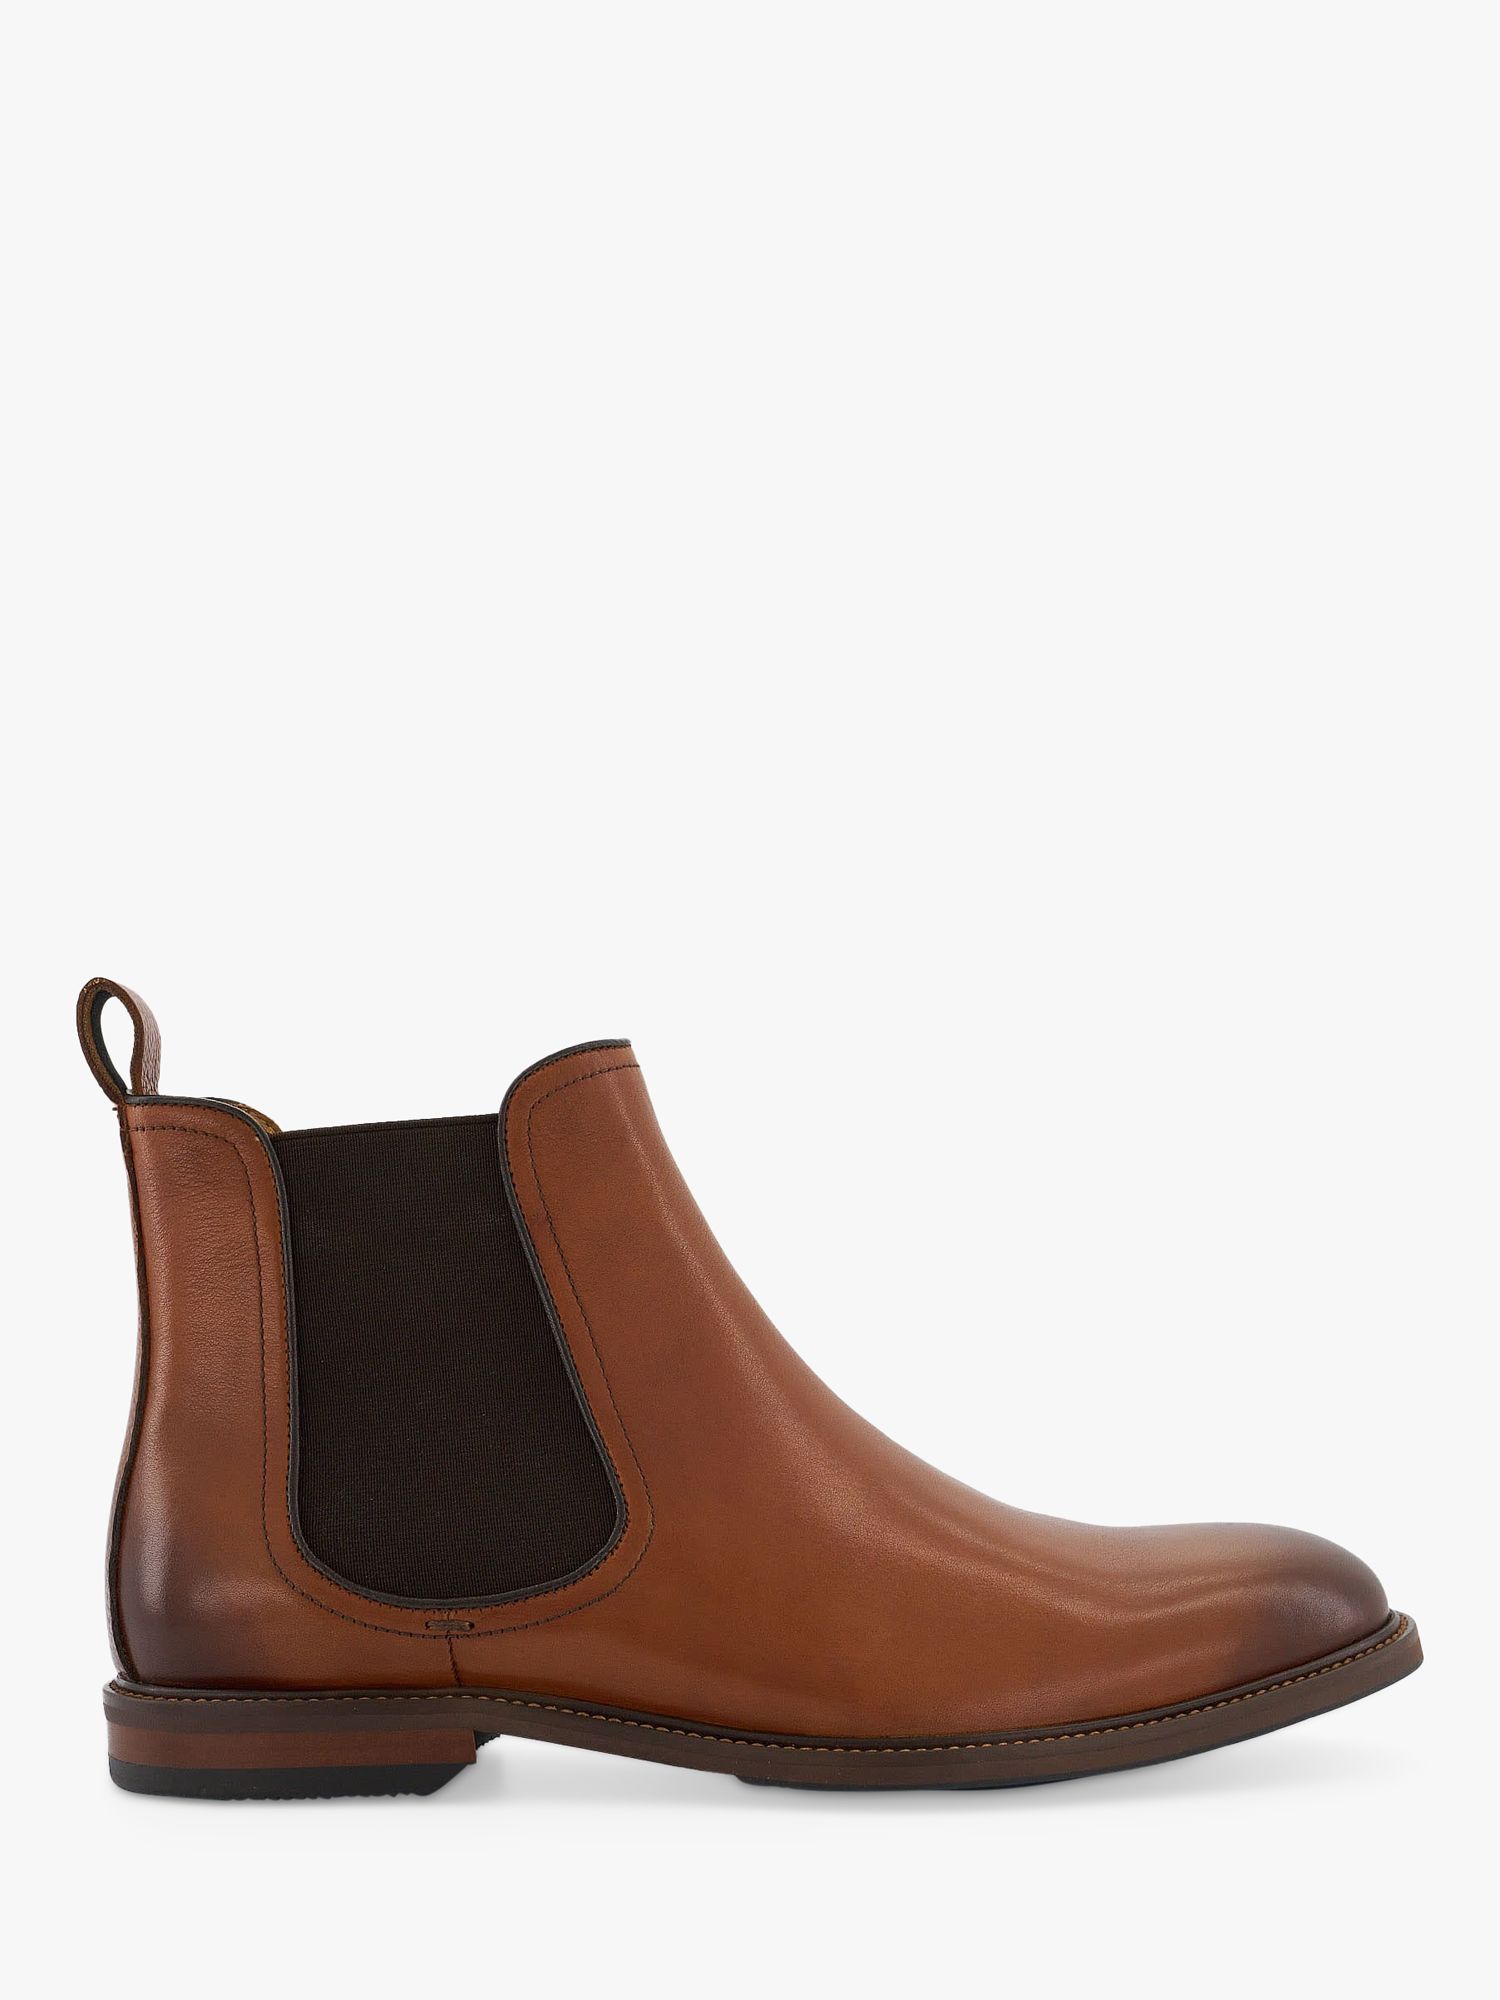 Dune Characteristic Leather Chelsea Boots, Tan at John Lewis & Partners